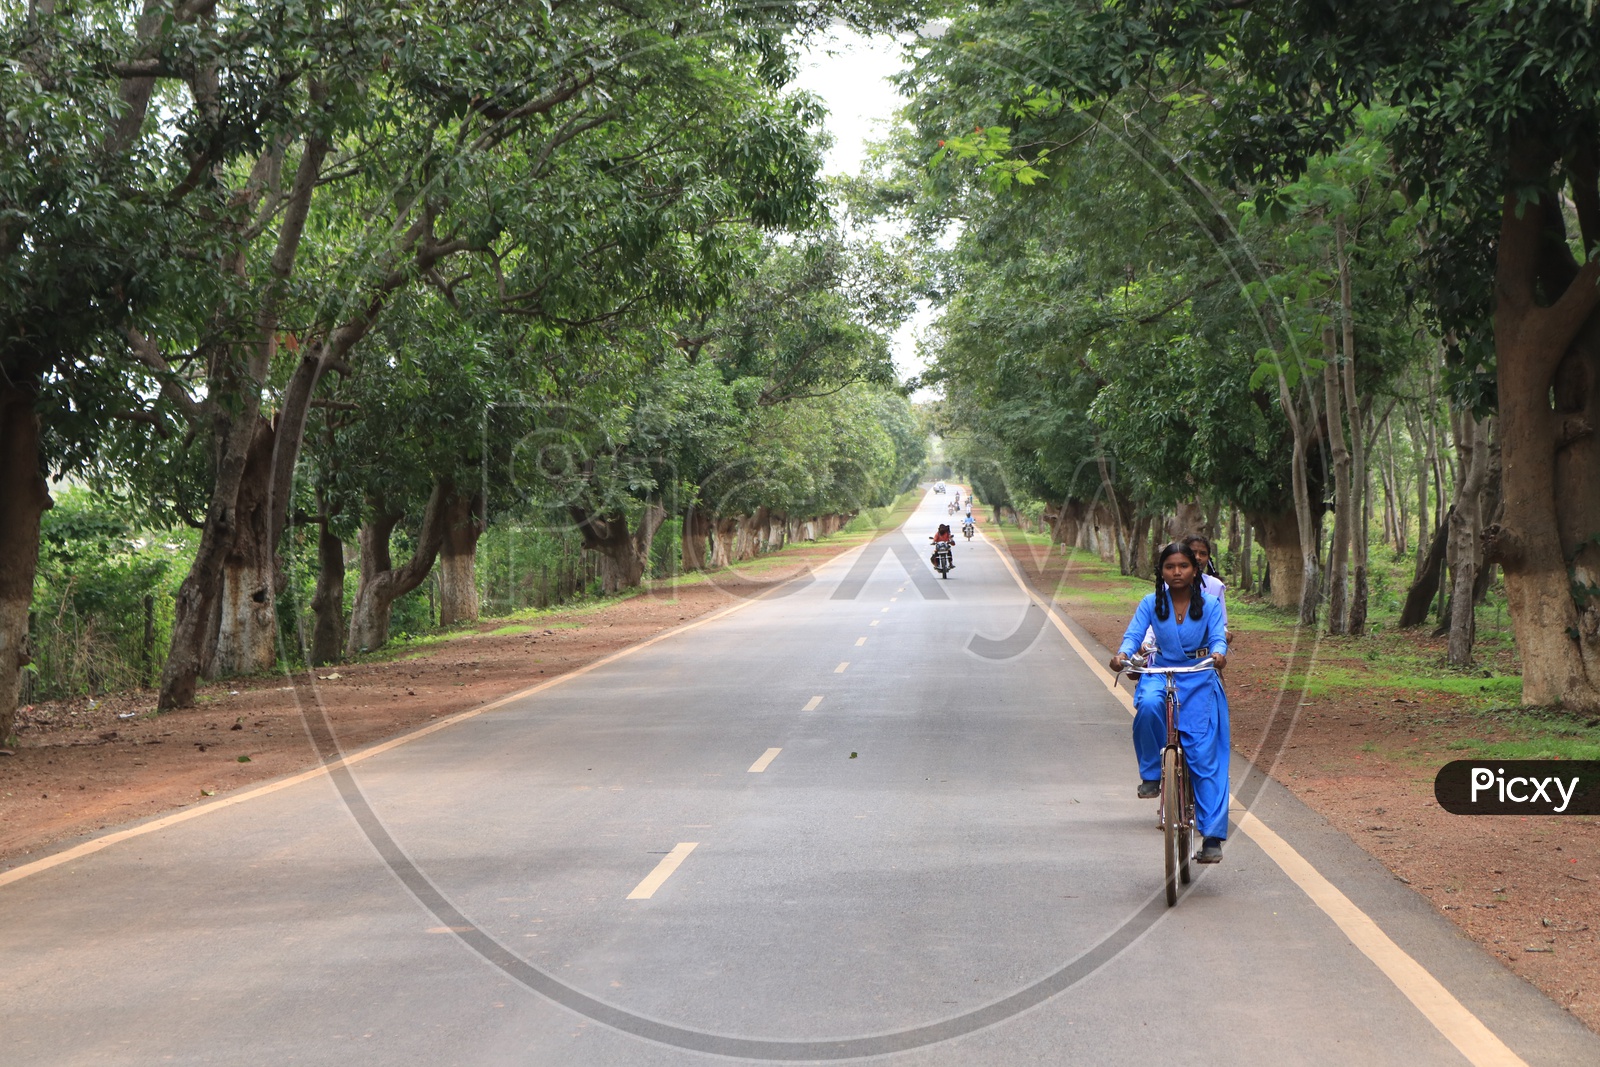 School girls on a bicycle on road